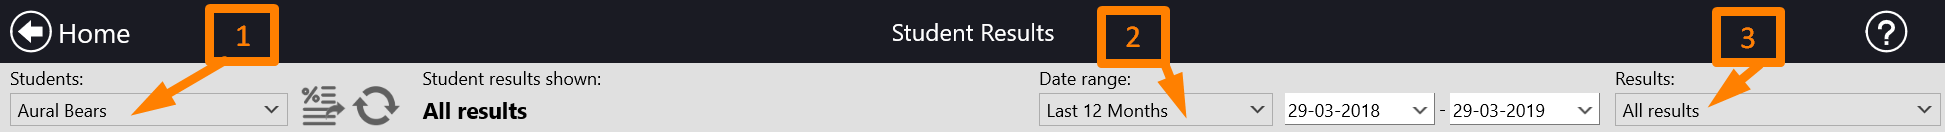 student results